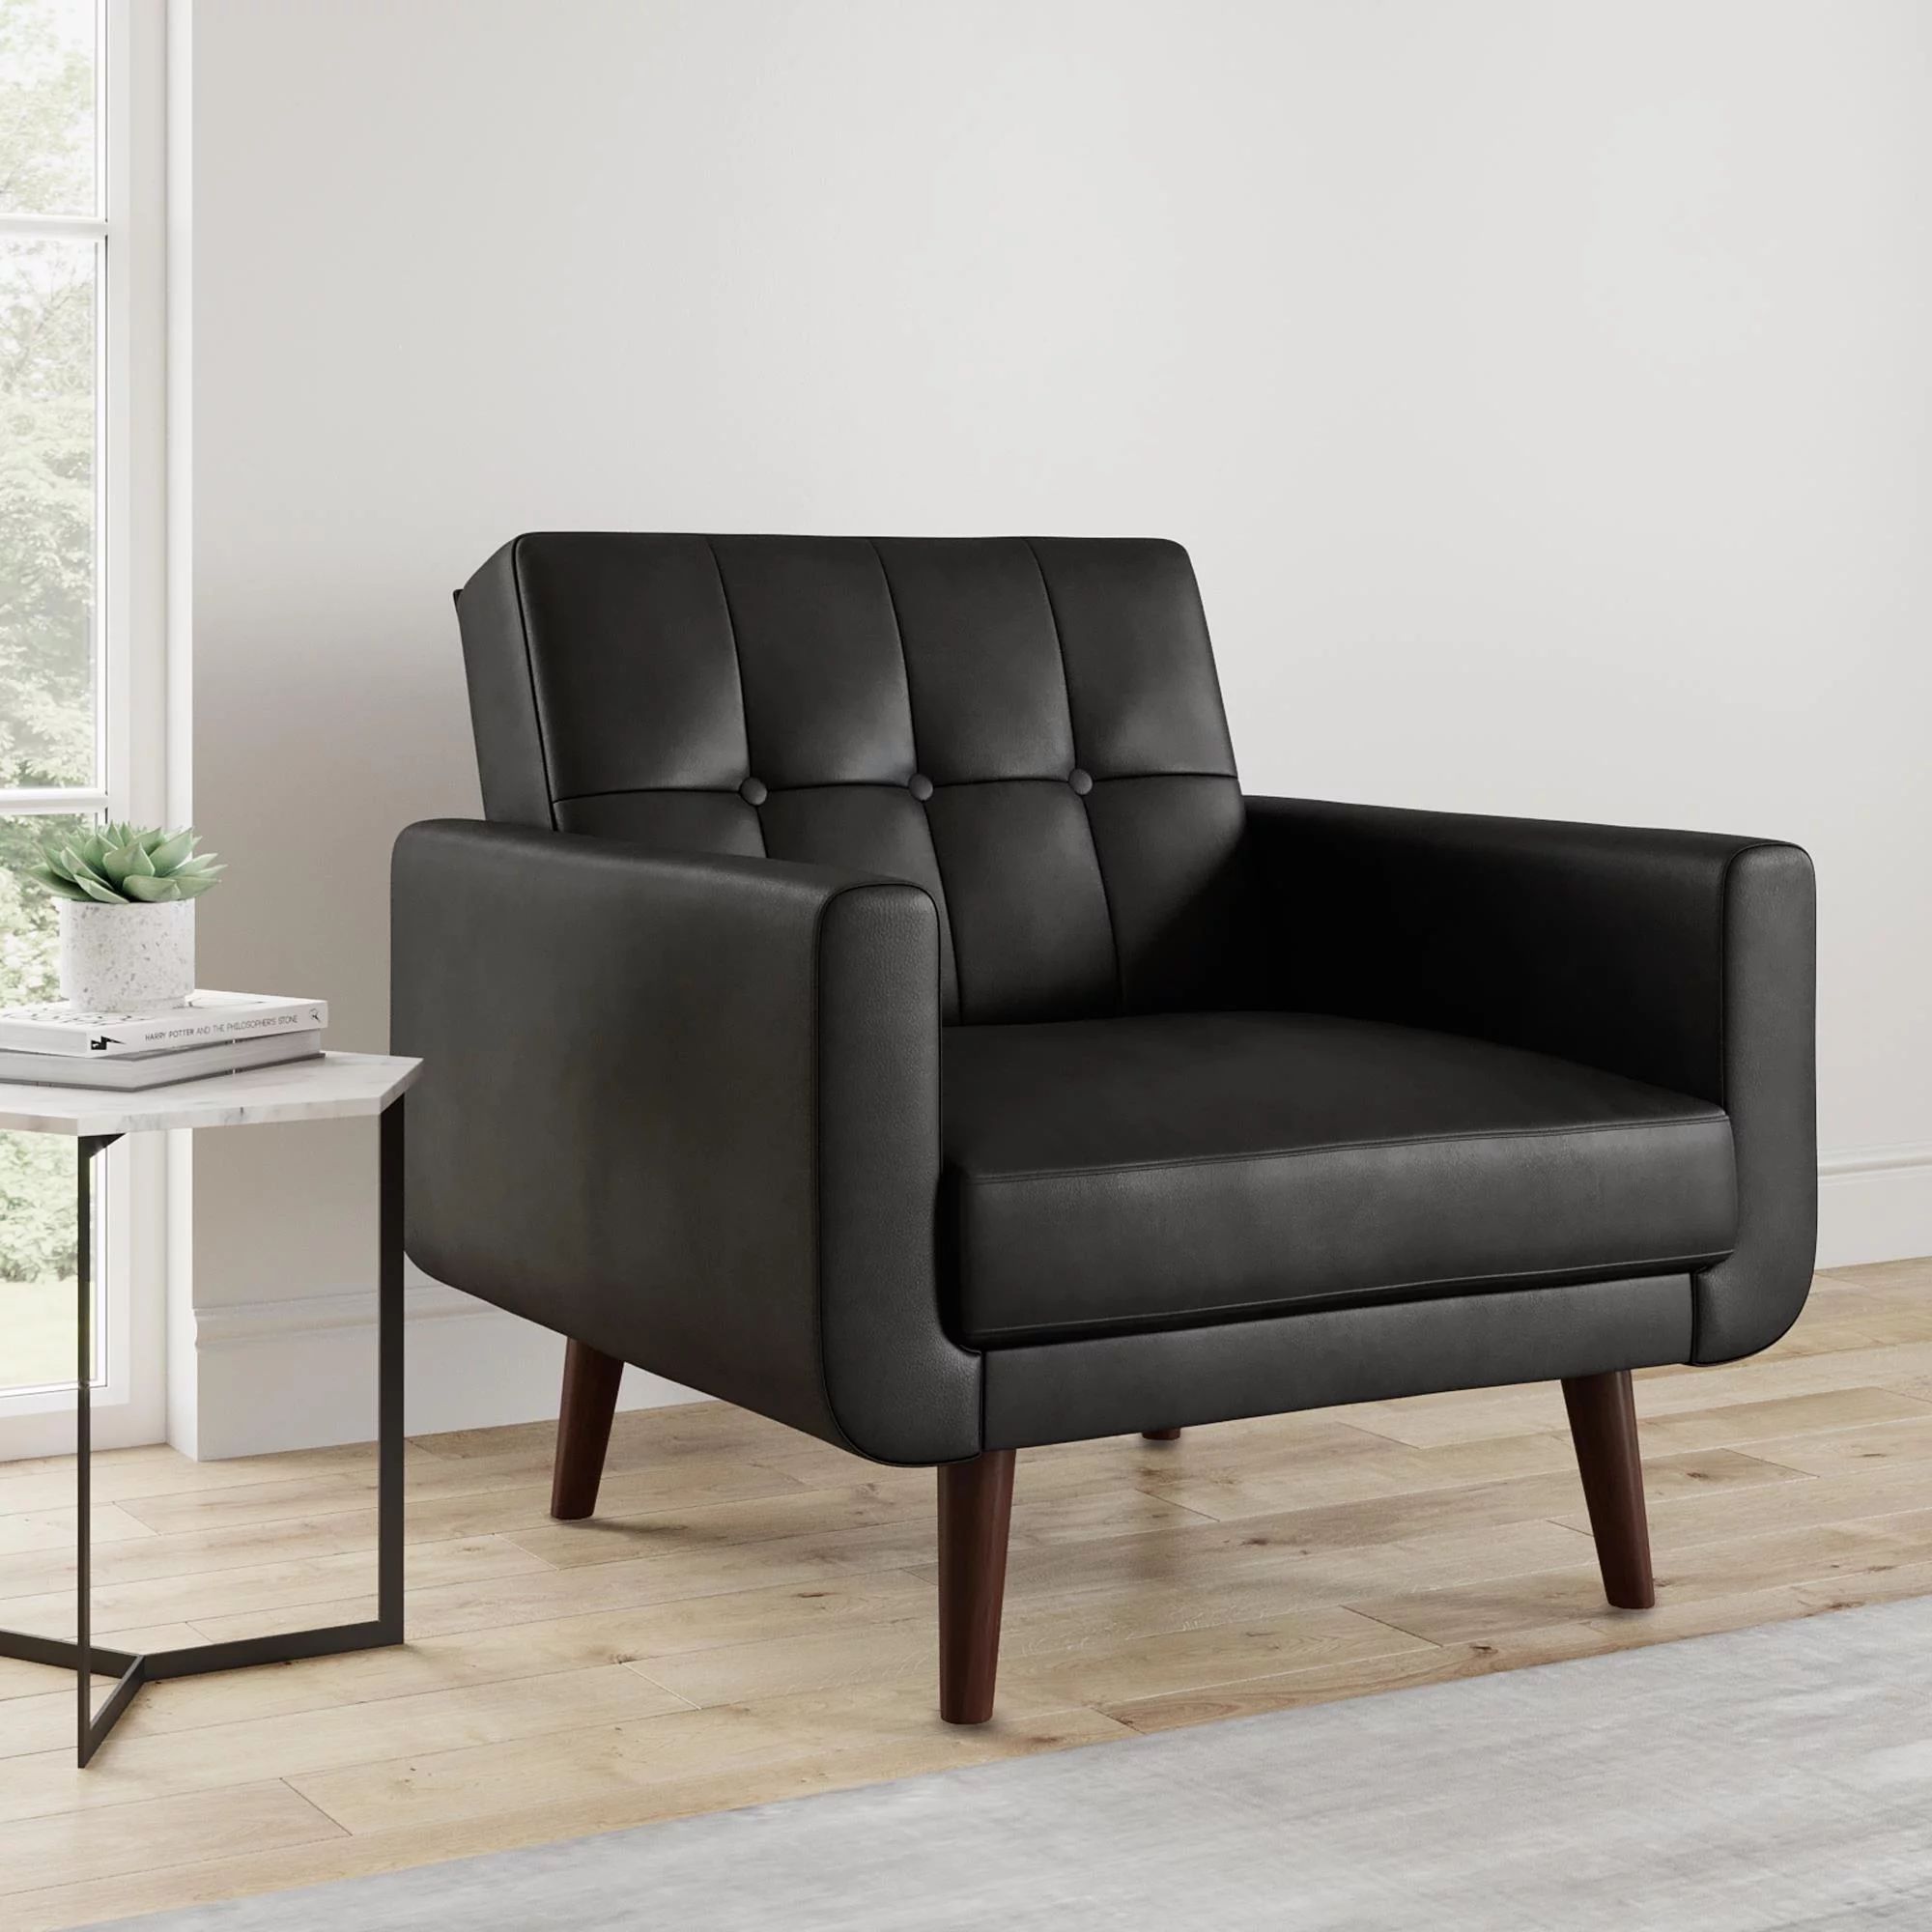 Better Homes & Gardens Nola Modern Chair with Arms, Black Faux Leather - Walmart.com | Walmart (US)